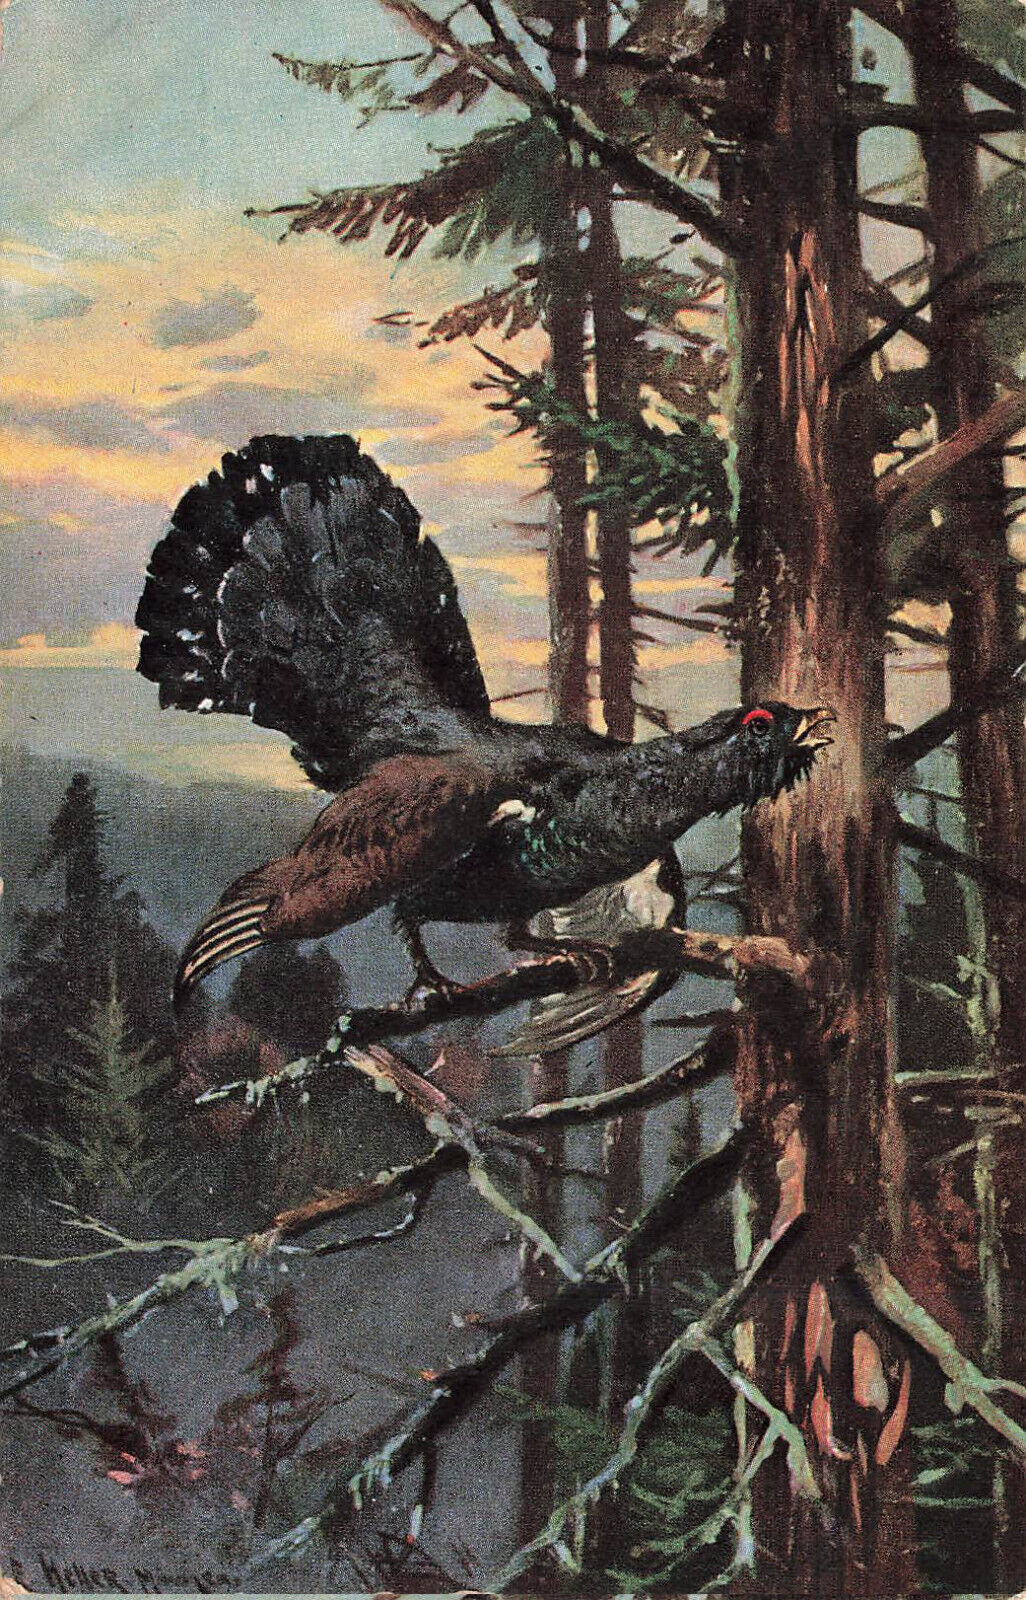 VINTAGE GAME BIRD POSTCARD SPRUCE GROUSE IN TREE 061422 R